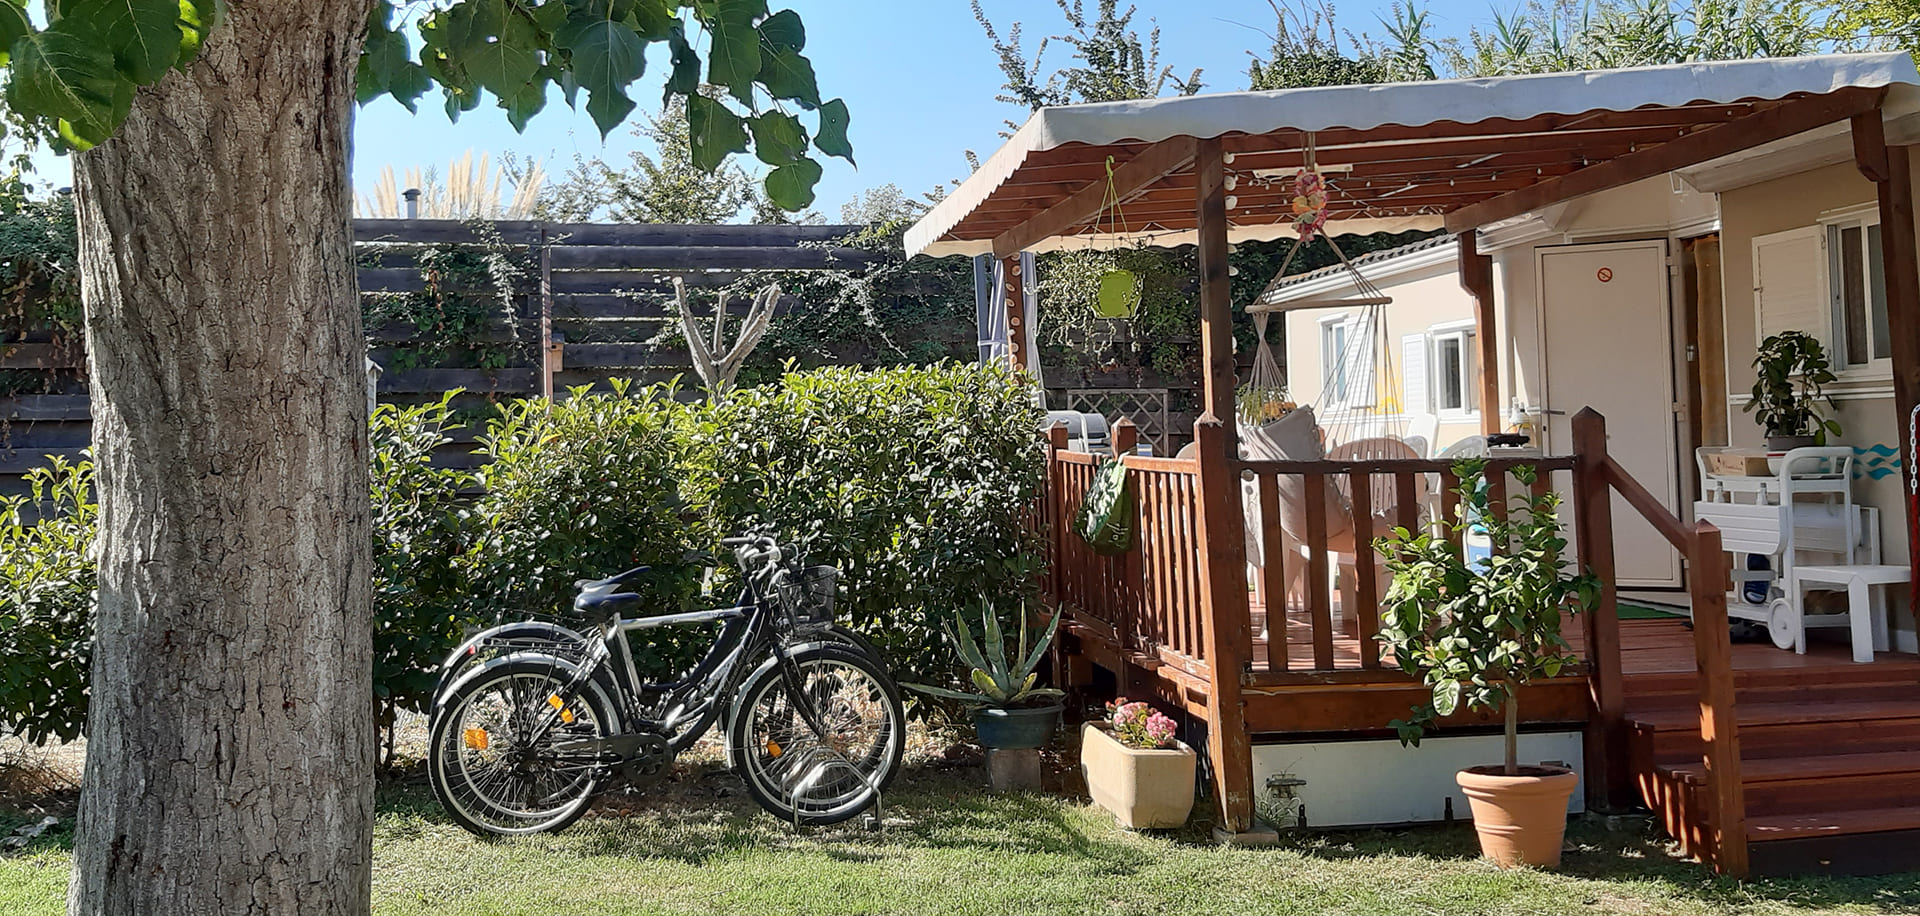 Mobilehome rental near Béziers at Les Peupliers campsite on the banks of the Canal du Midi